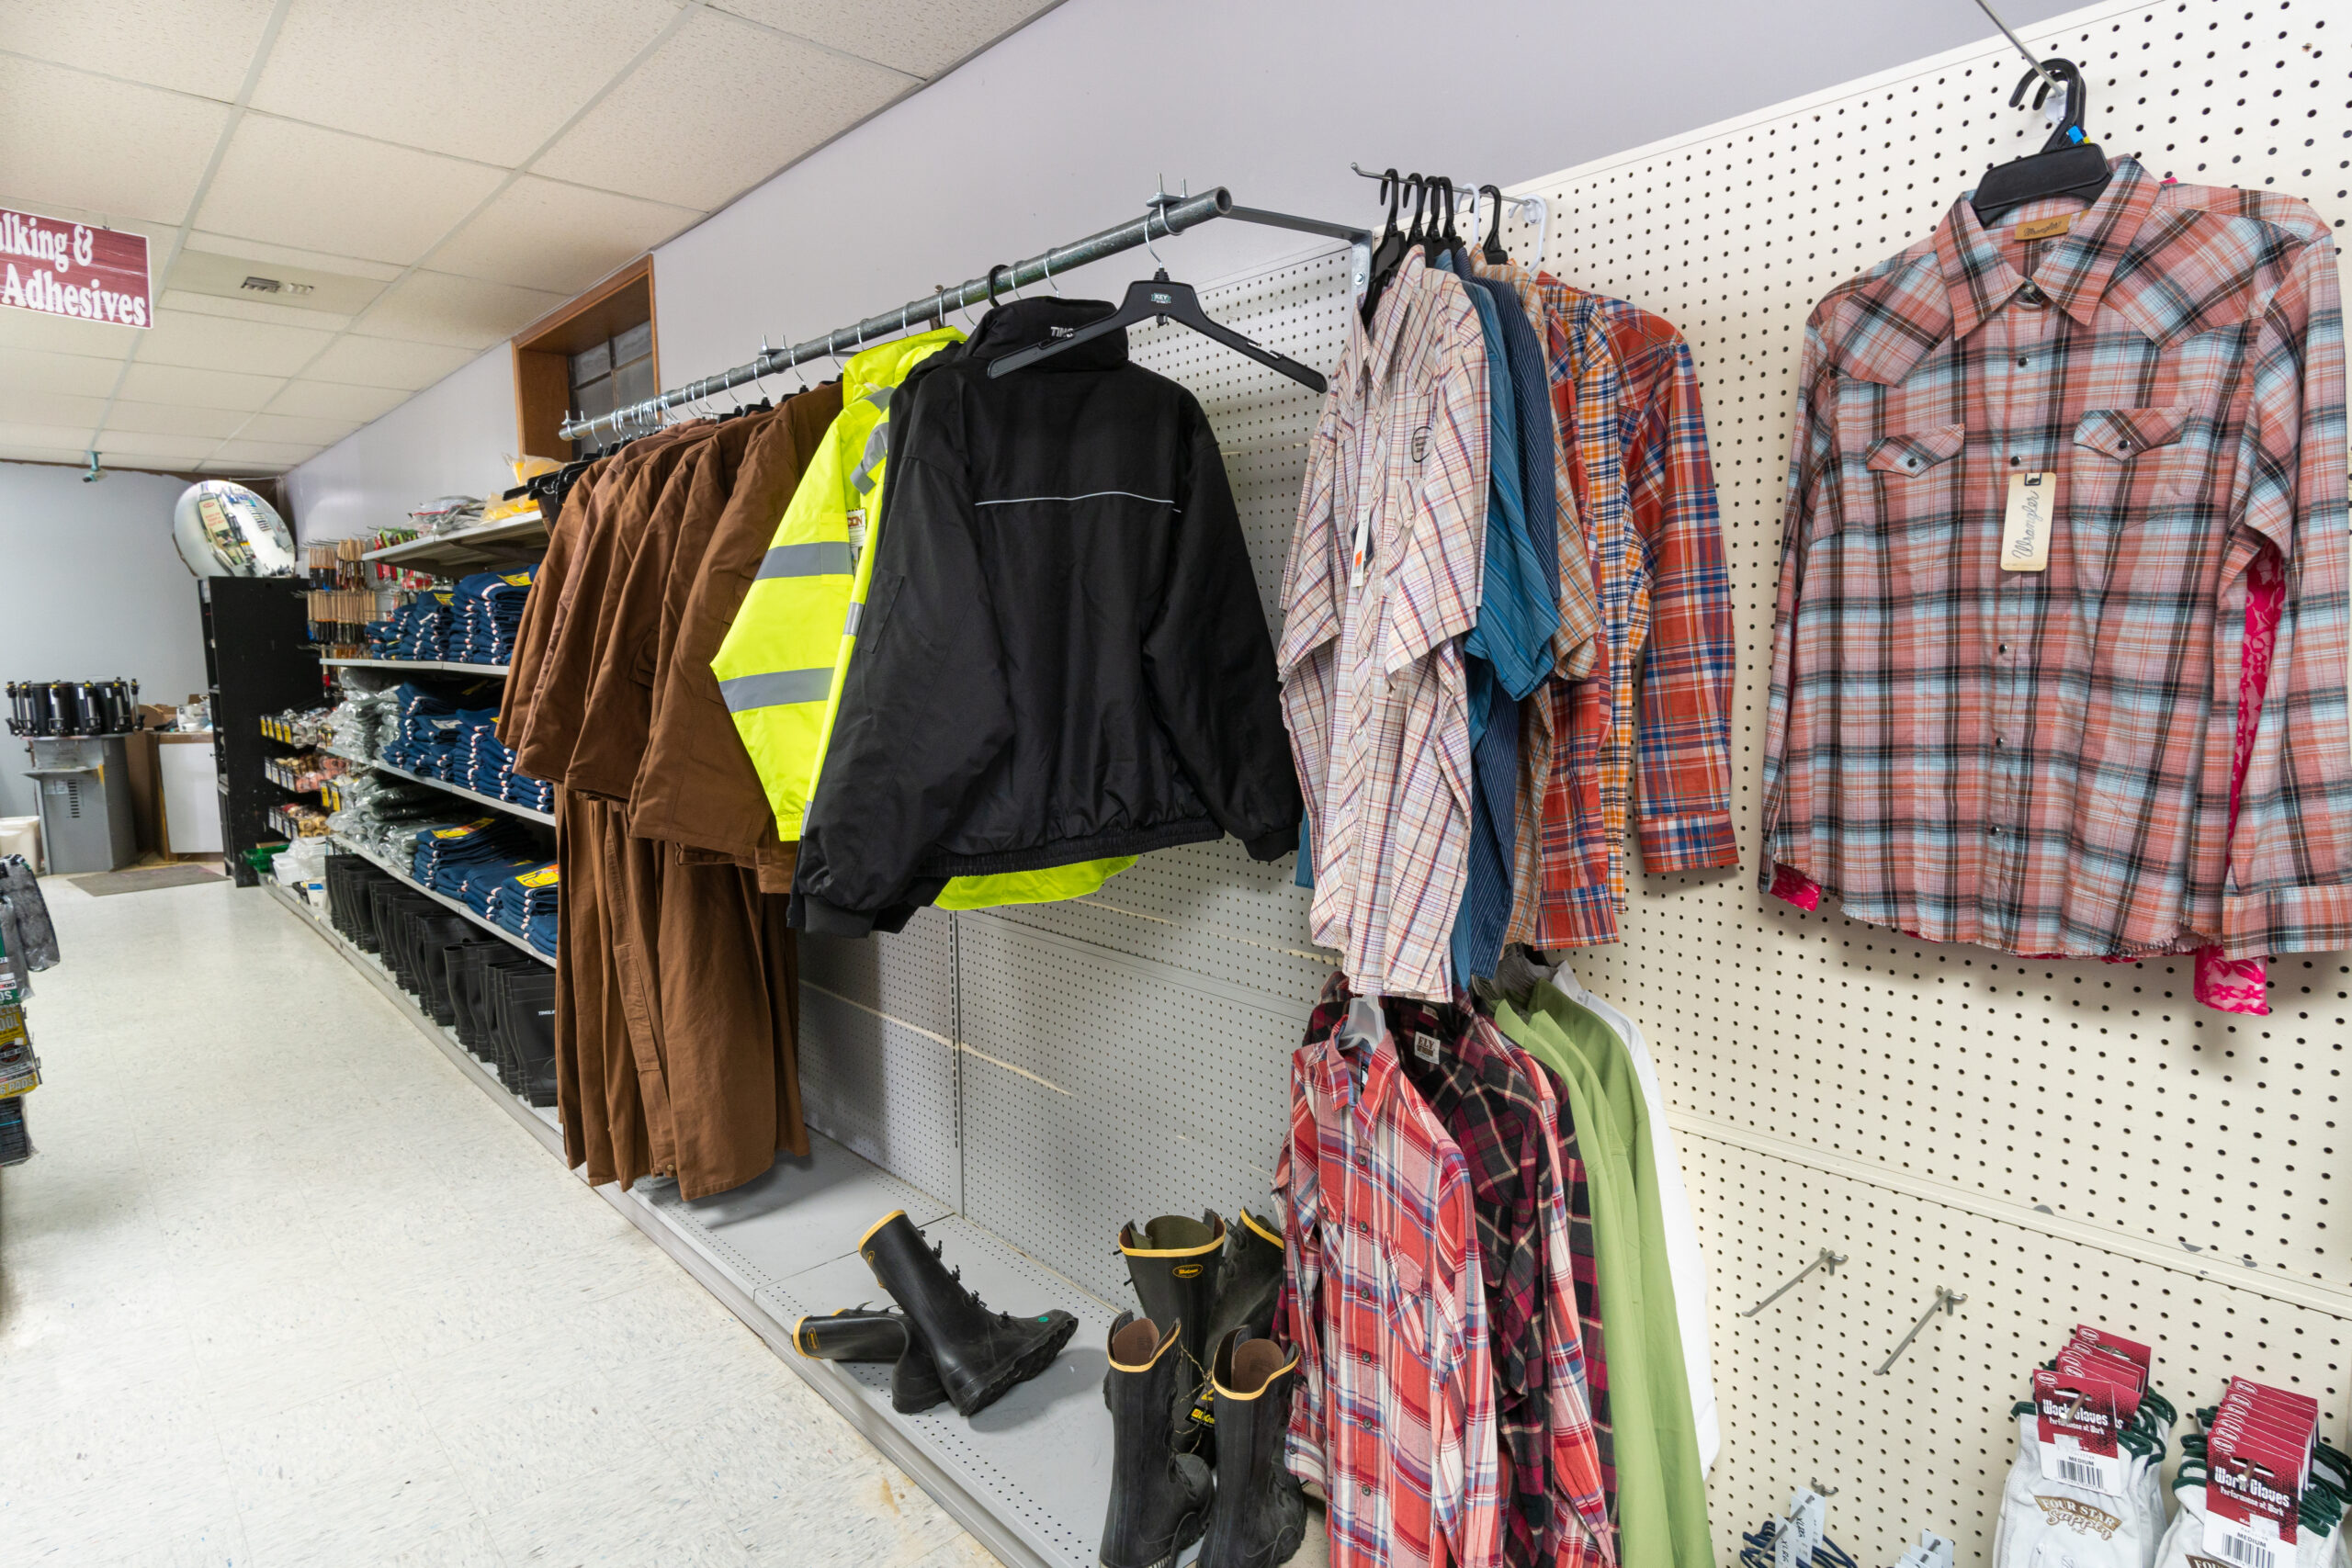 Work clothes & boots for sale at Four Star Supply in Colfax